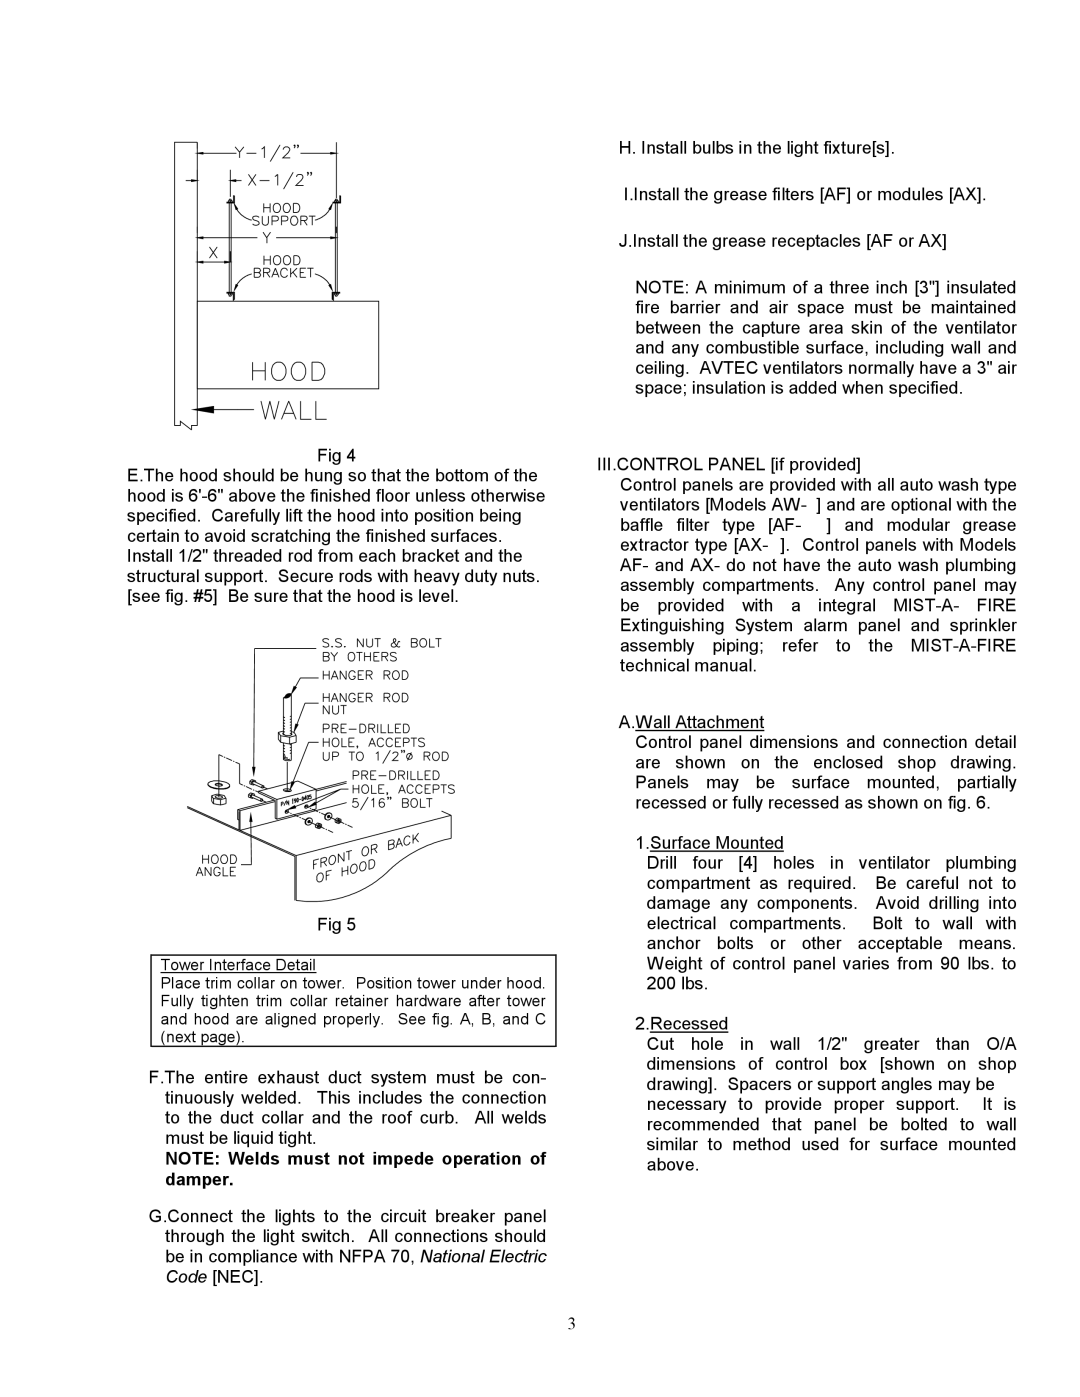 Unified Brands VENTILATION SYSTEMS specifications NOTE Welds must not impede operation of damper 